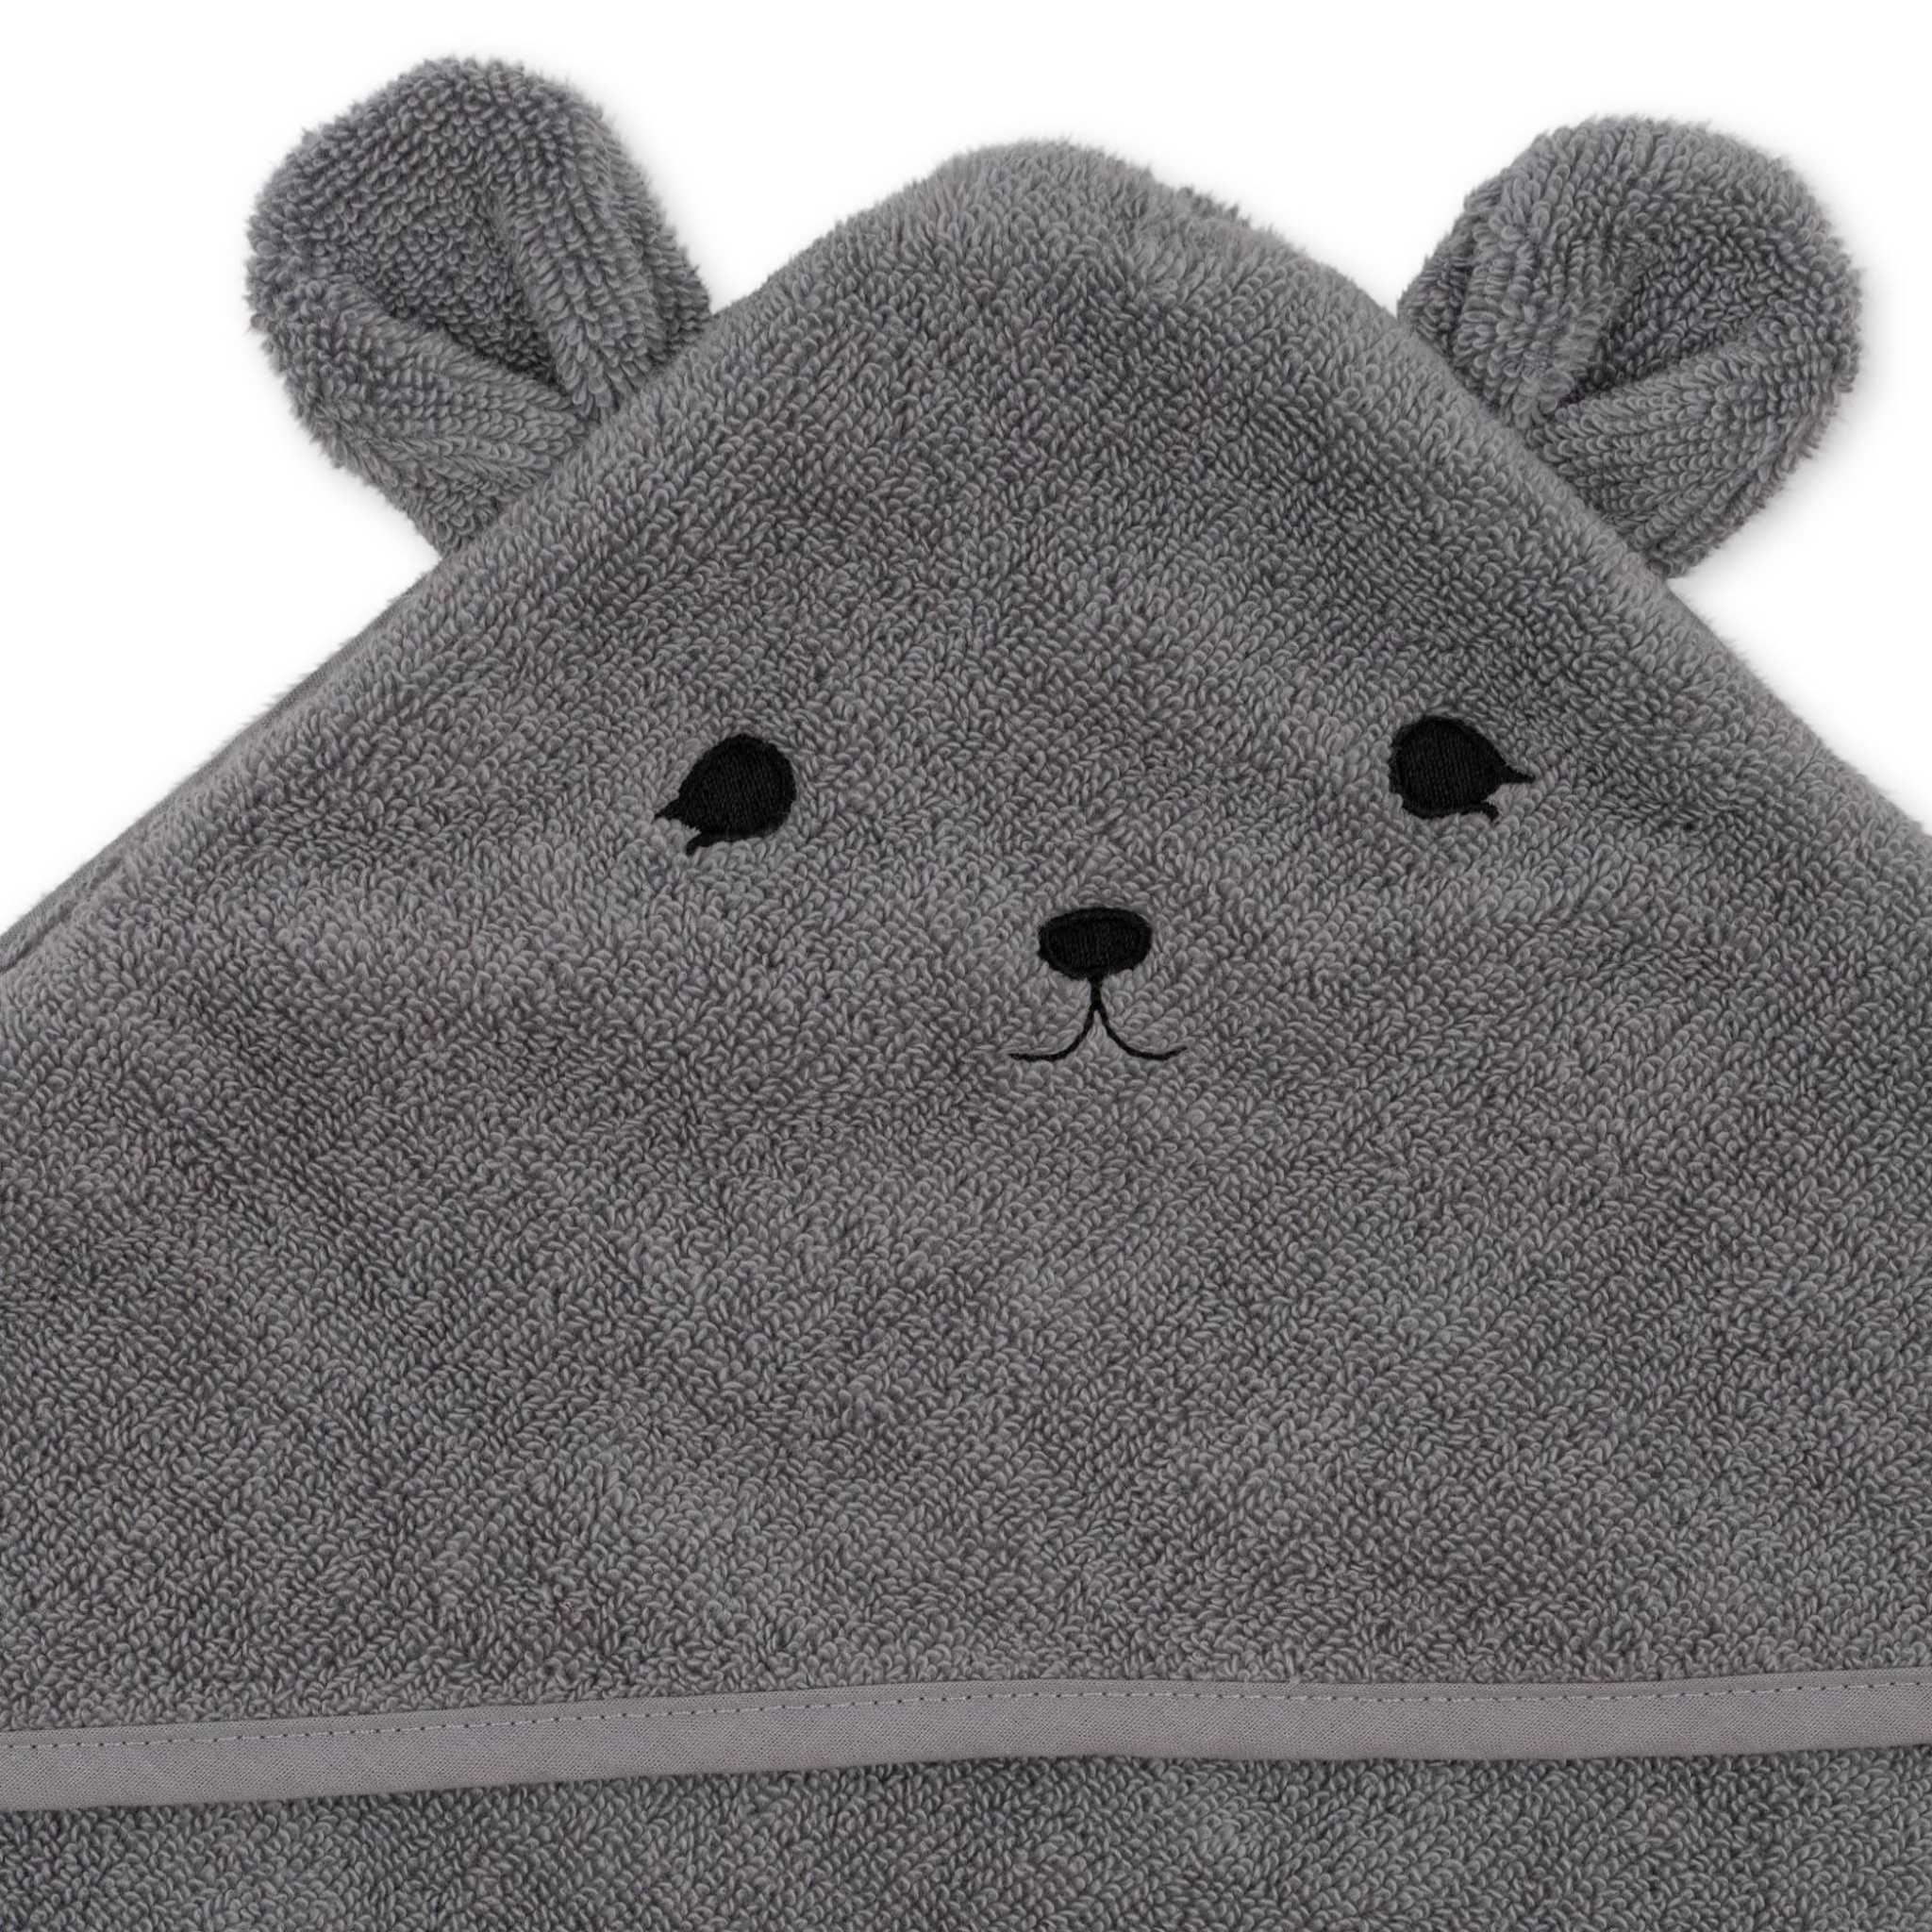 Konges Sløjd Terry Towel - Bear Showing Face and Ear Details